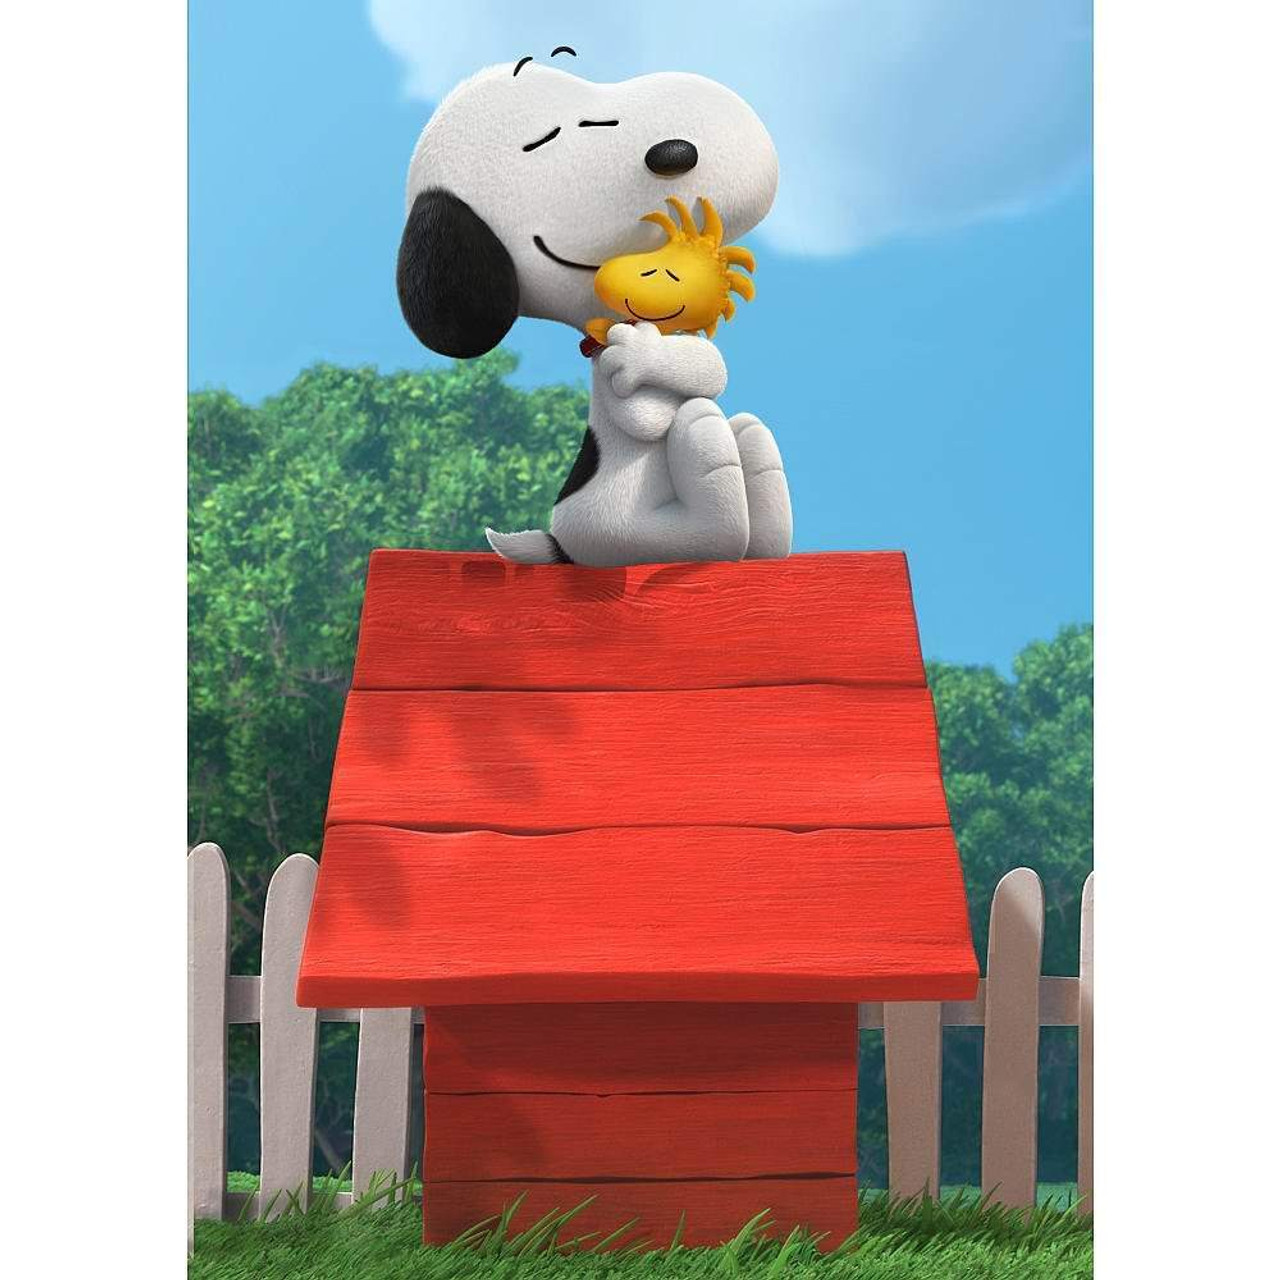 Dog house and sticks and hats Bruins Snoopy Woodstock on the roof